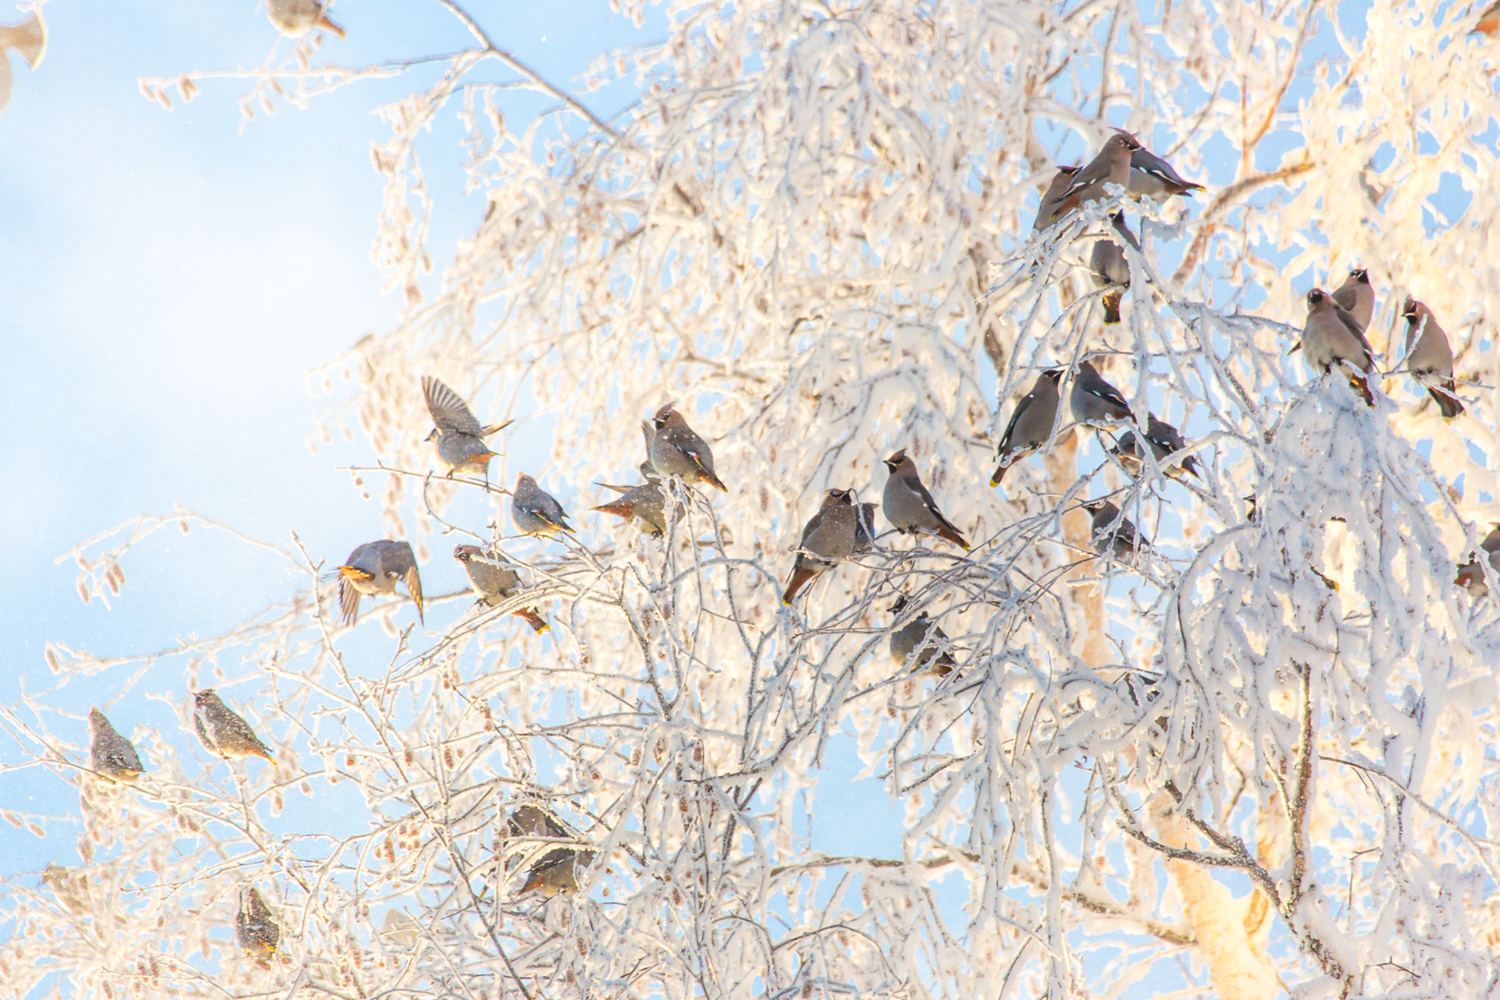 Bohemian waxwings flock together in a birch tree on the Fairbanks campus on a cold January afternoon. UAF Photo by Todd Paris